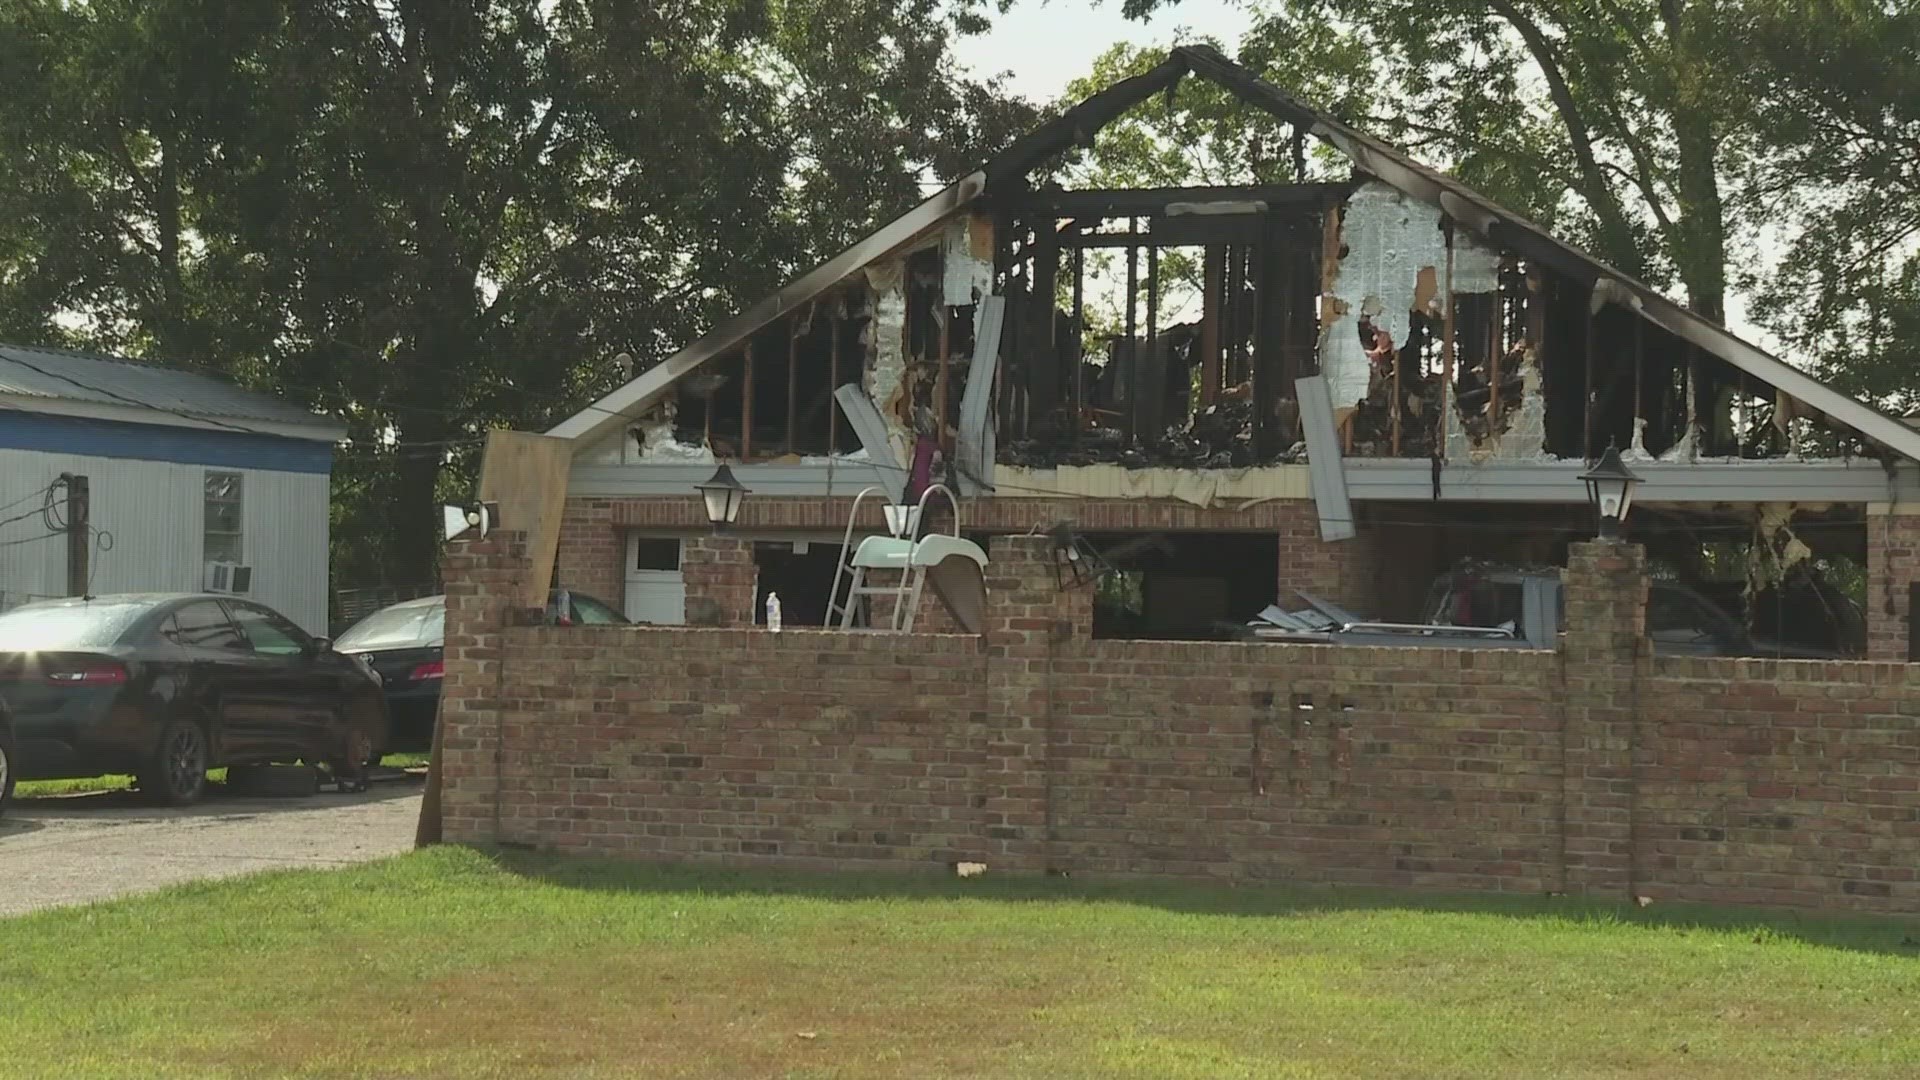 The state fire marshal's office confirmed the fatal house fire that happened early Wednesday, Sept.13 occurred due to wiring in the kitchen, connected to the stove